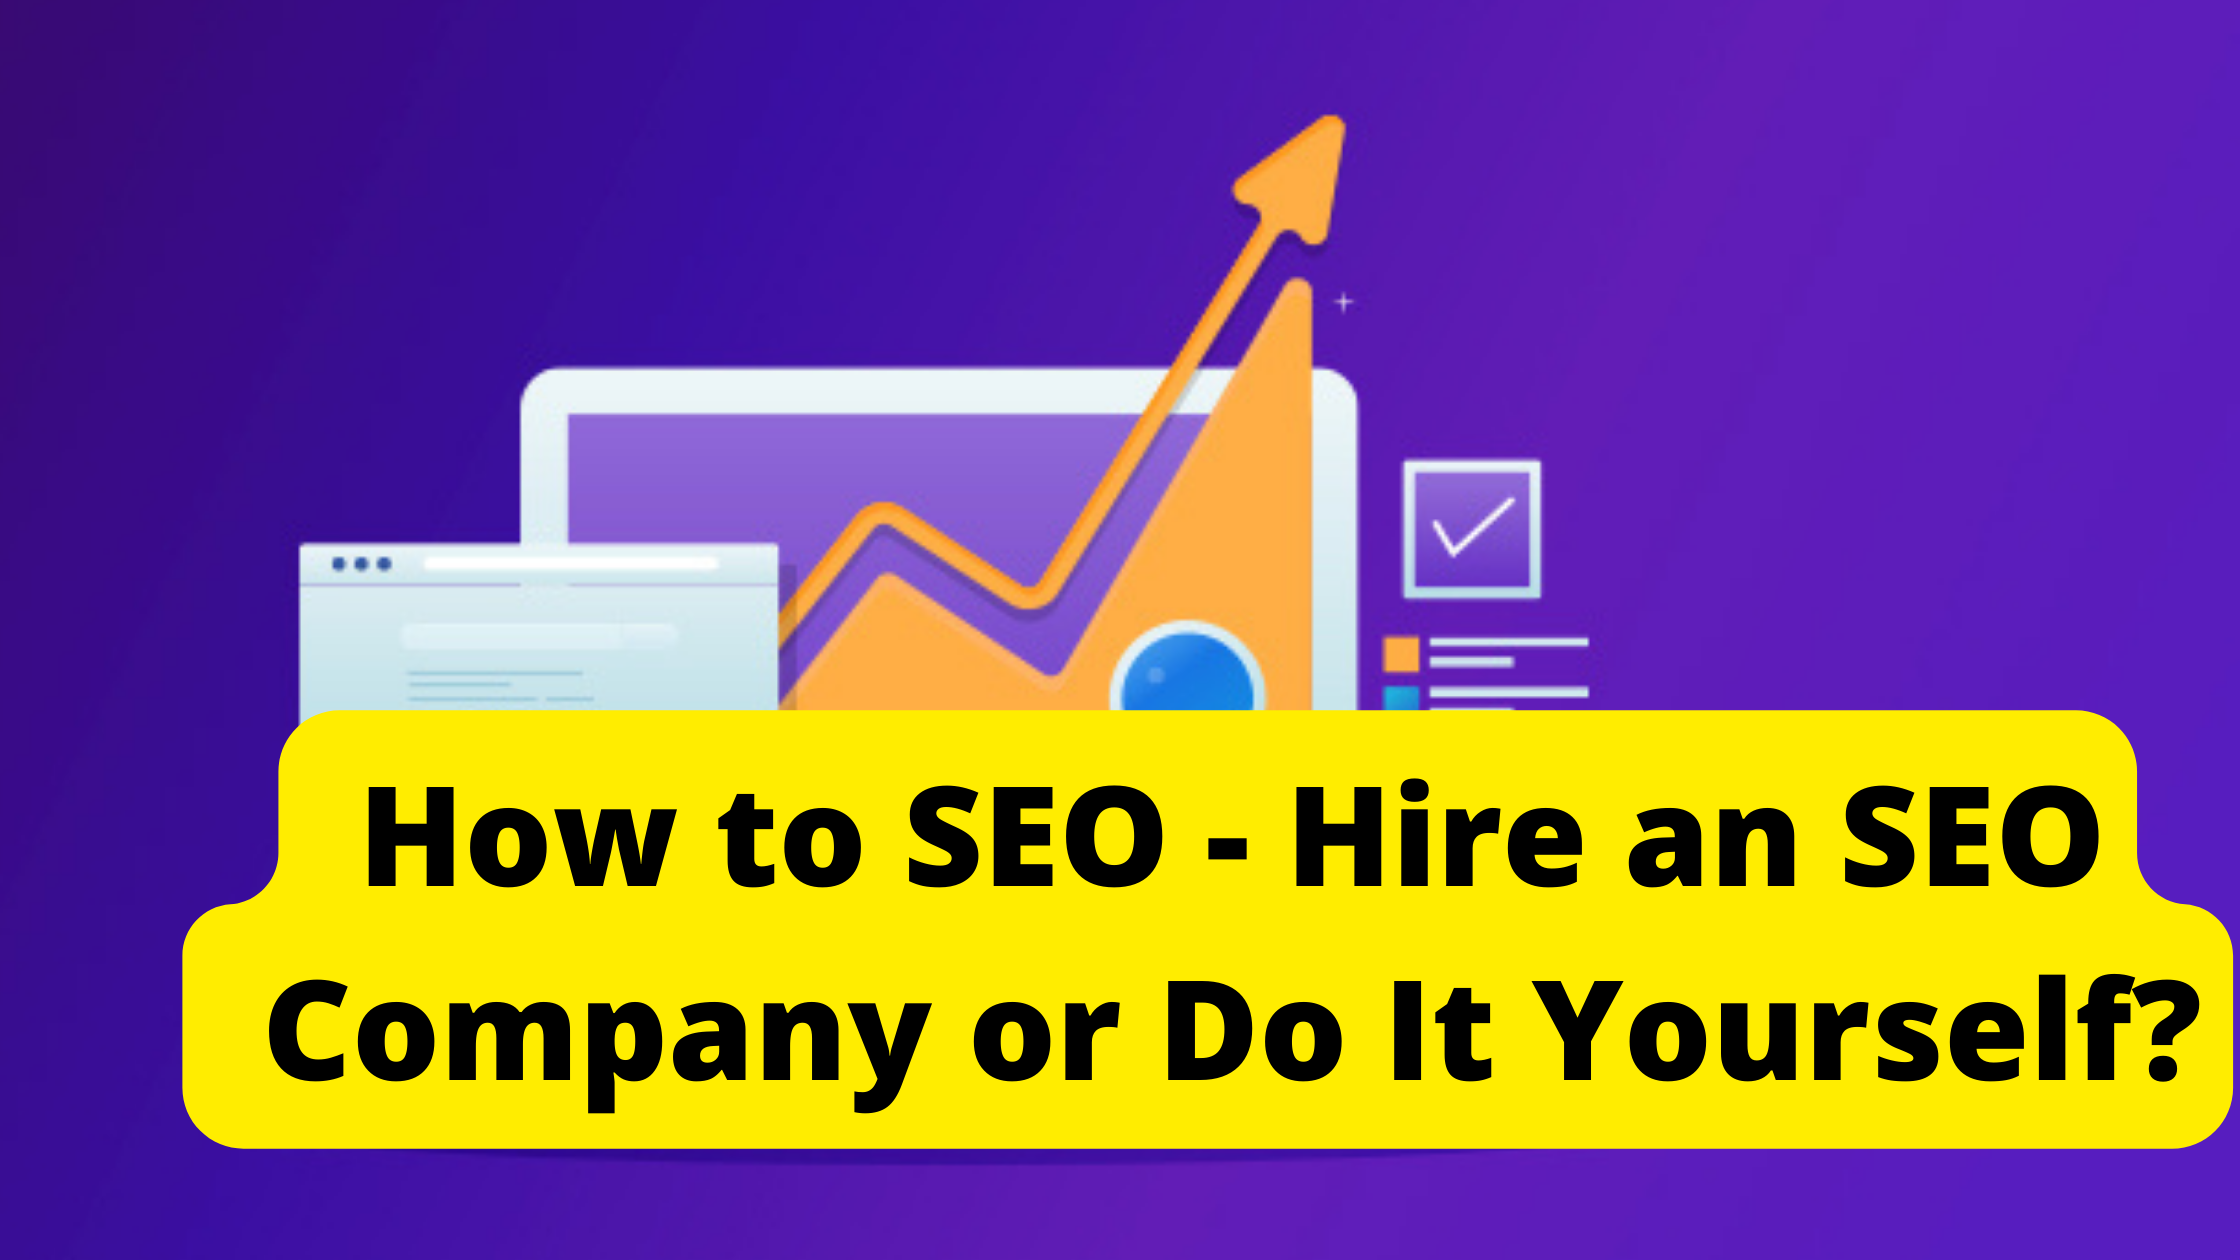 How to SEO - Hire an SEO Company or Do It Yourself?